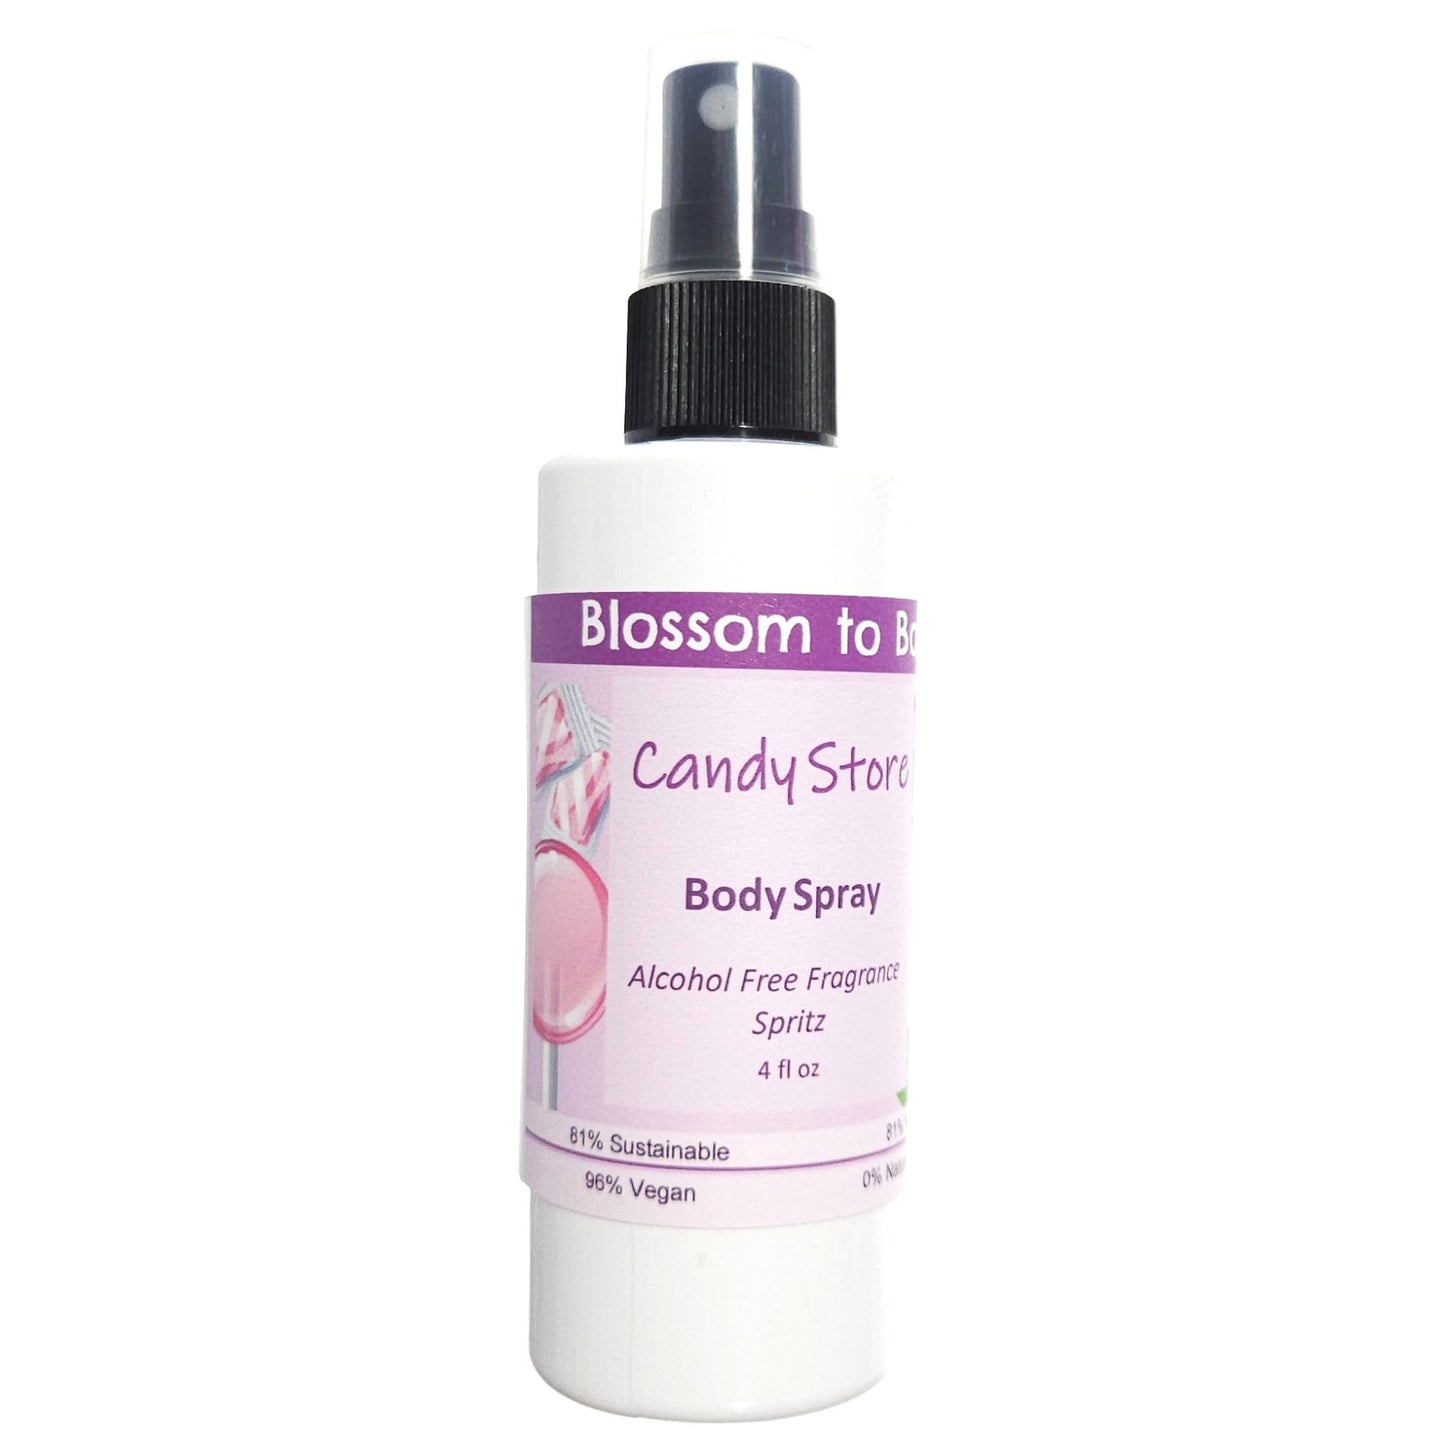 Buy Blossom to Bath Candy Store Body Spray from Flowersong Soap Studio.  Natural  freshening of skin, linens, or air  A nostalgic fragrance has pops of sweet fruity bubbles on a bed of spun sugar and vanilla bean.